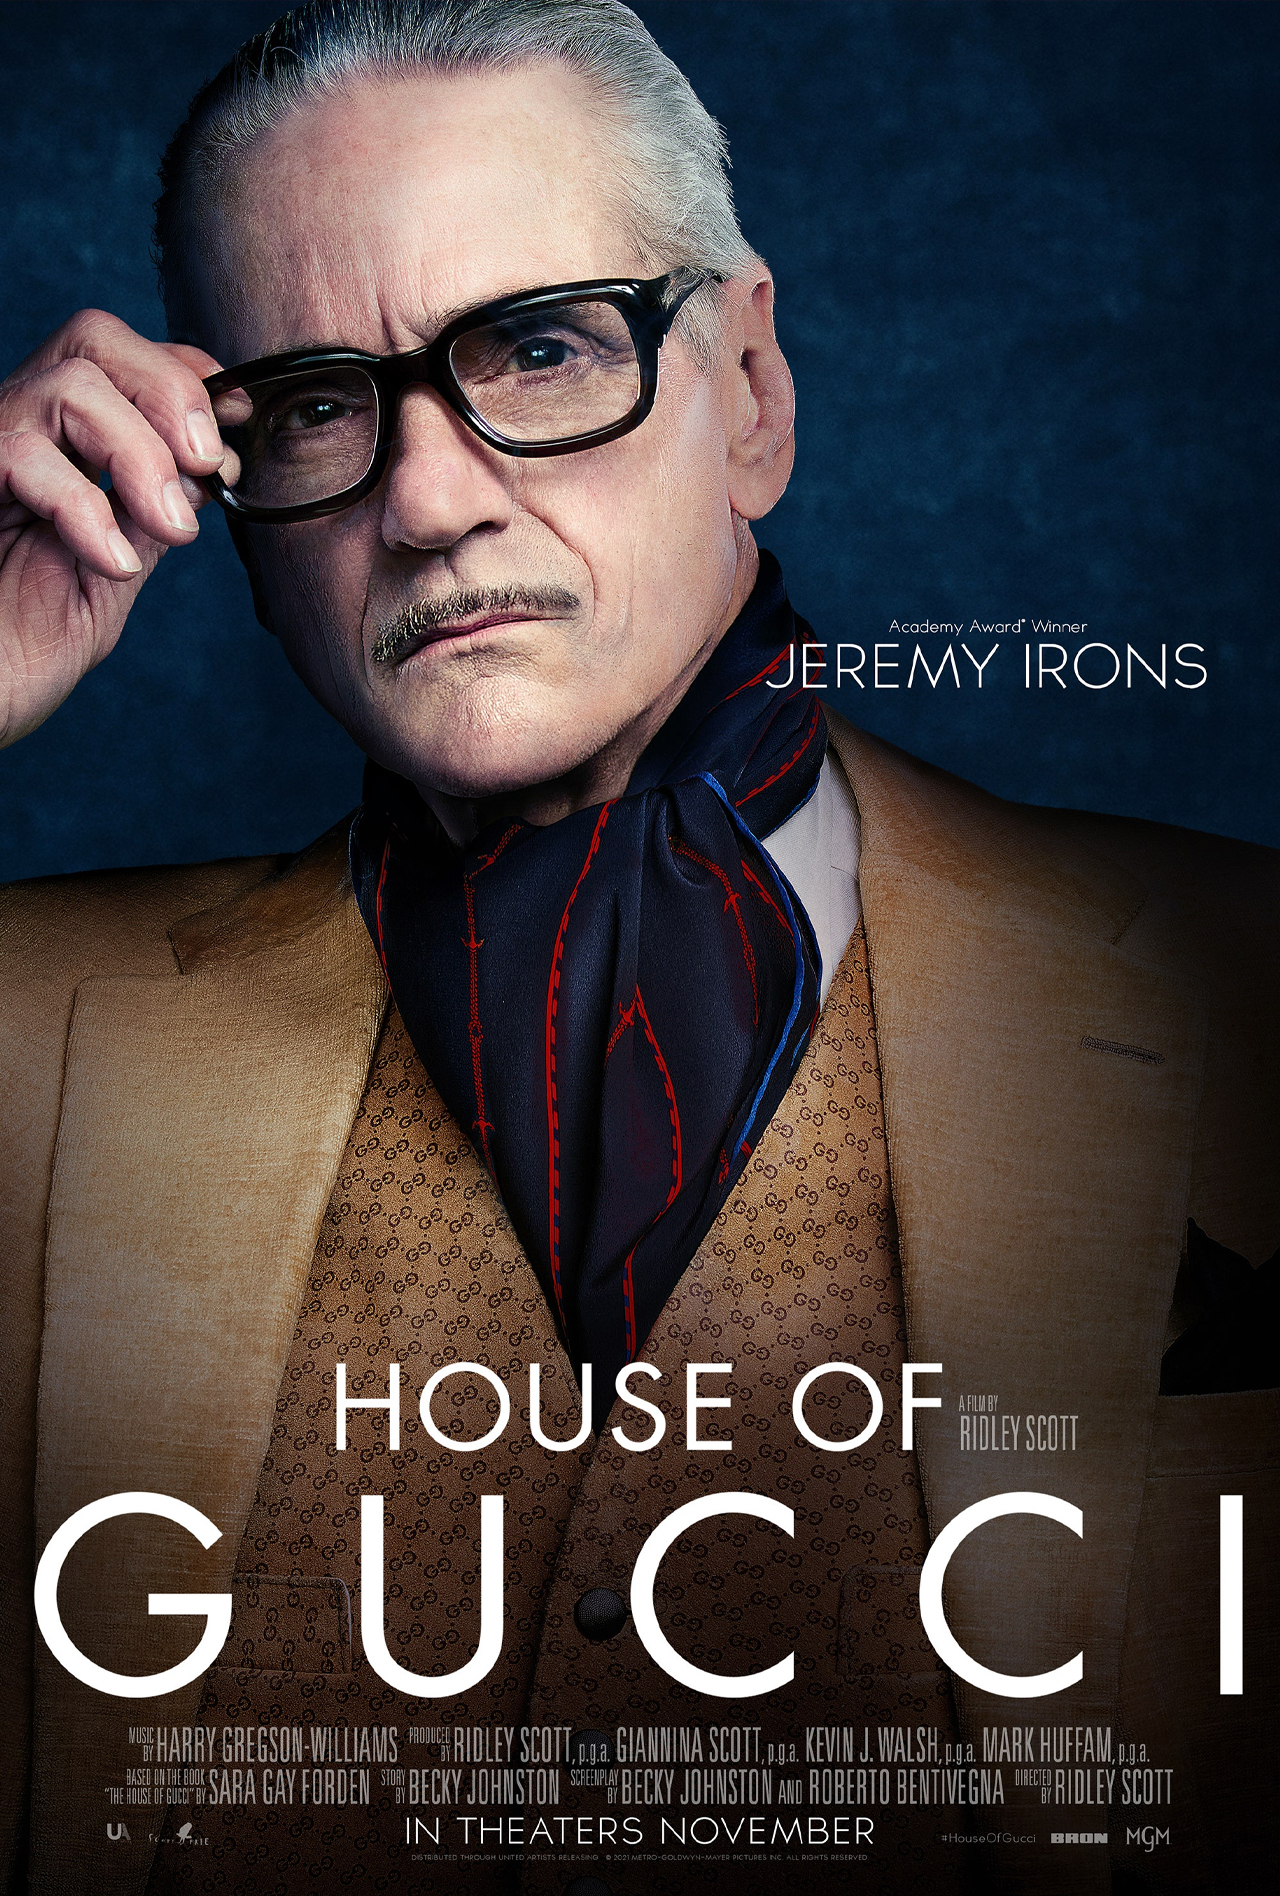 House Gucci Posters - JoBlo